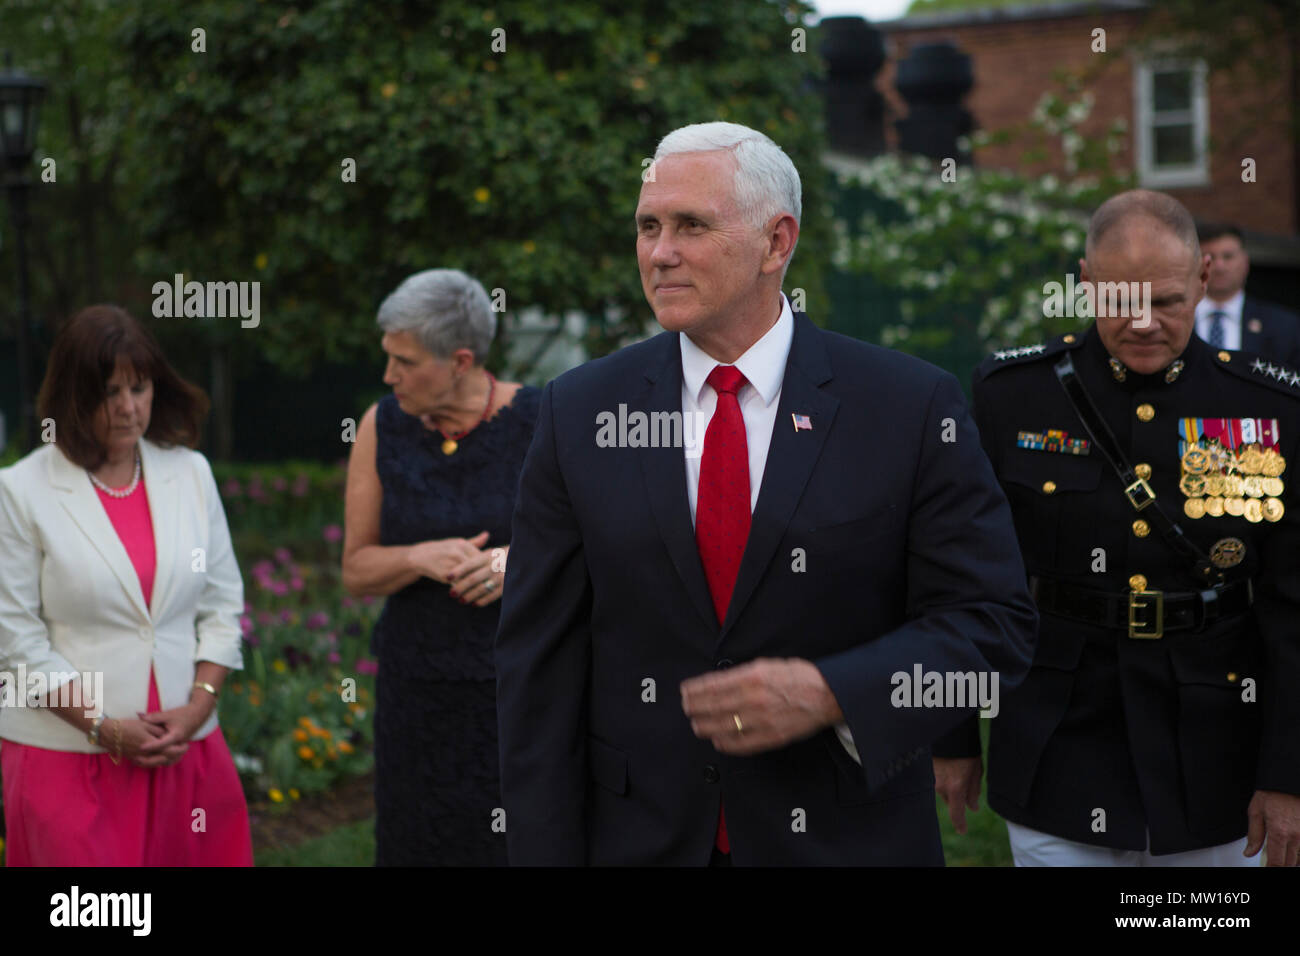 Vice President of the United States Mike Pence attend a parade as the guest of honor at Marine Barracks Washington, D.C. on May 4, 2018. The hosting official was the Commandant of the Marine Corps Gen. Robert B. Neller. The evening parade summer tradition began in 1934, and features the Silent Drill Platoon, the U.S. Marine Band, the U.S. Marine Drum and Bugle Corps and two marching companies. More than 3,500 guests attend the parade every week. (U.S. Marine Corps photo by Cpl. Daisha R. Sosa) Stock Photo